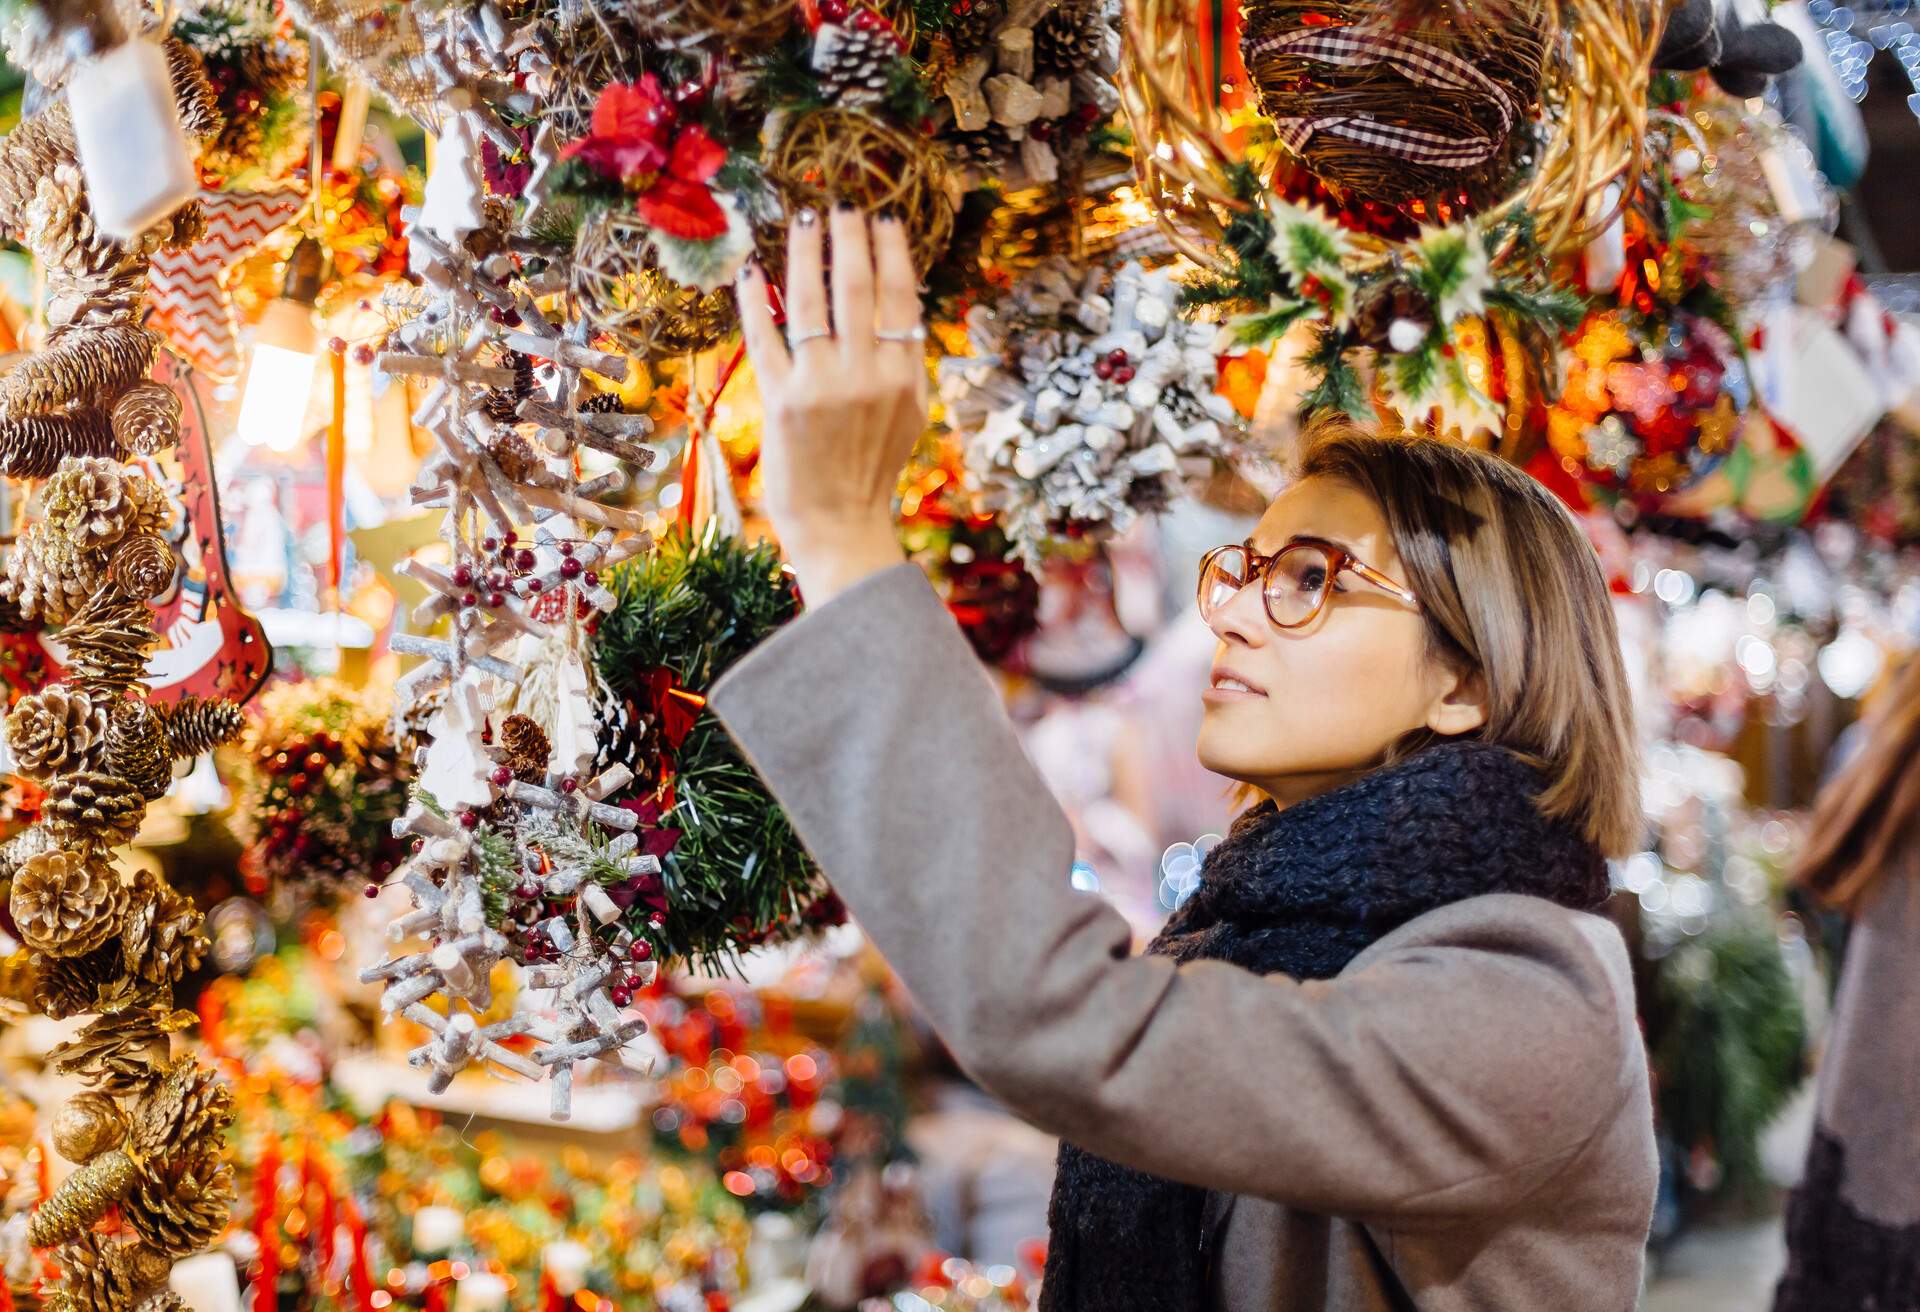 A woman with glasses looking at an ornament on display in a store.